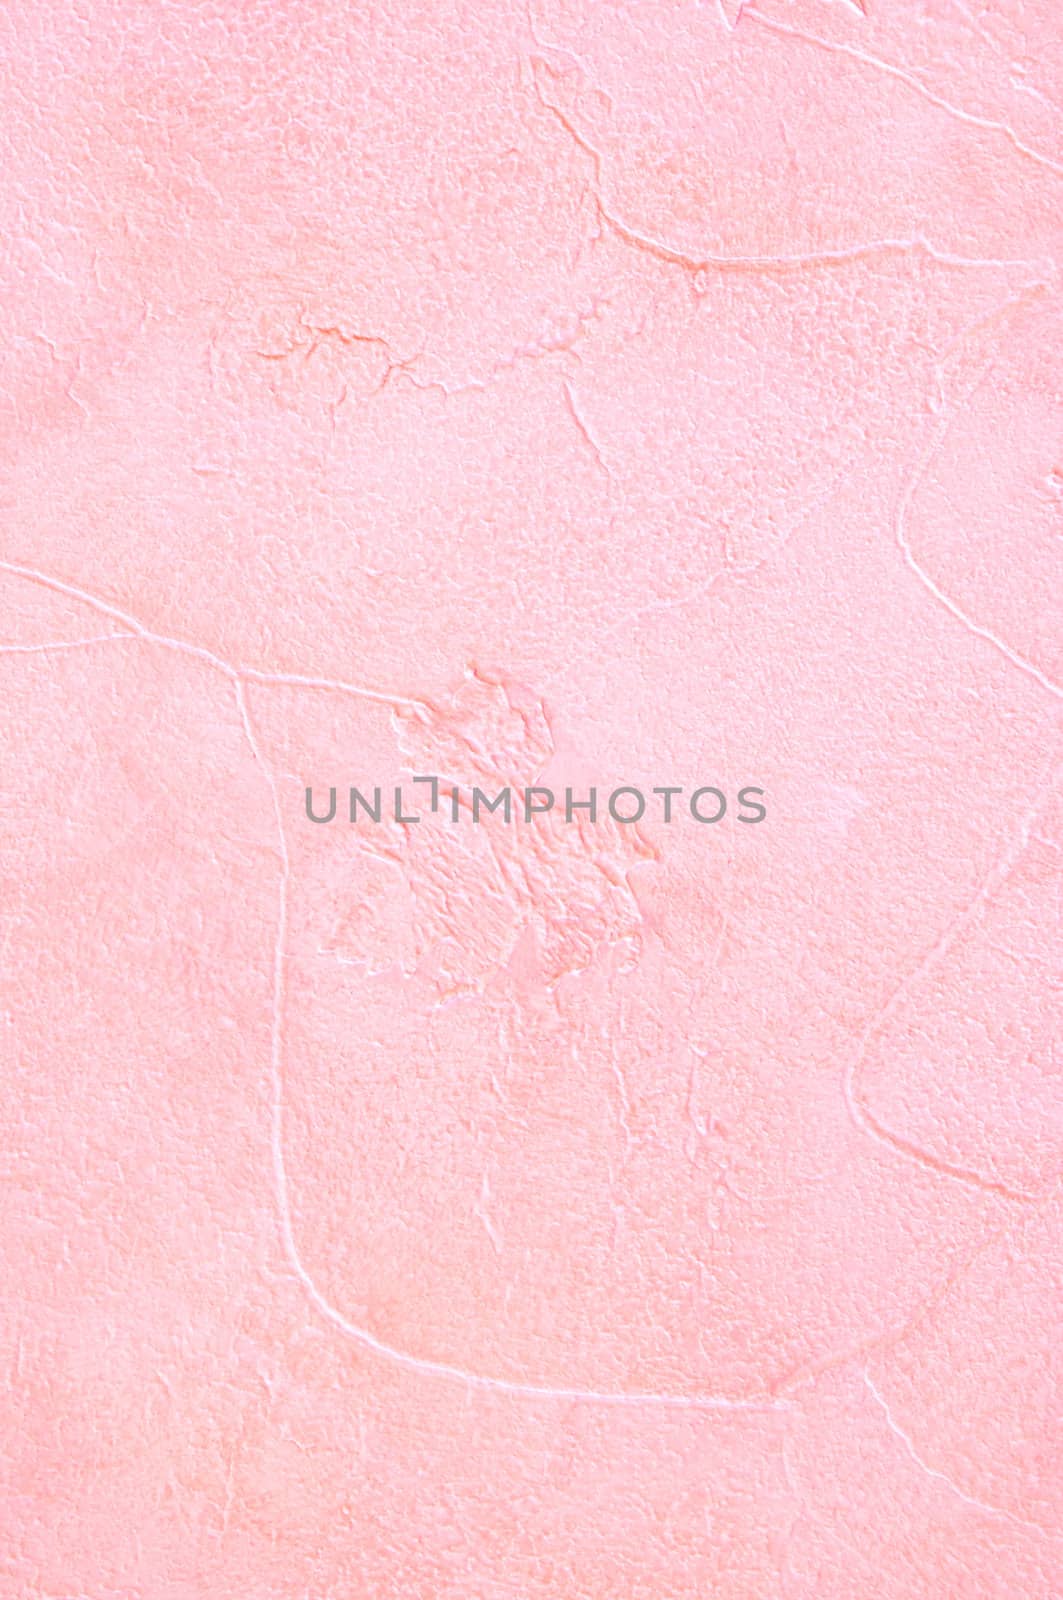 Light pink plaster with a deep relief on a wall